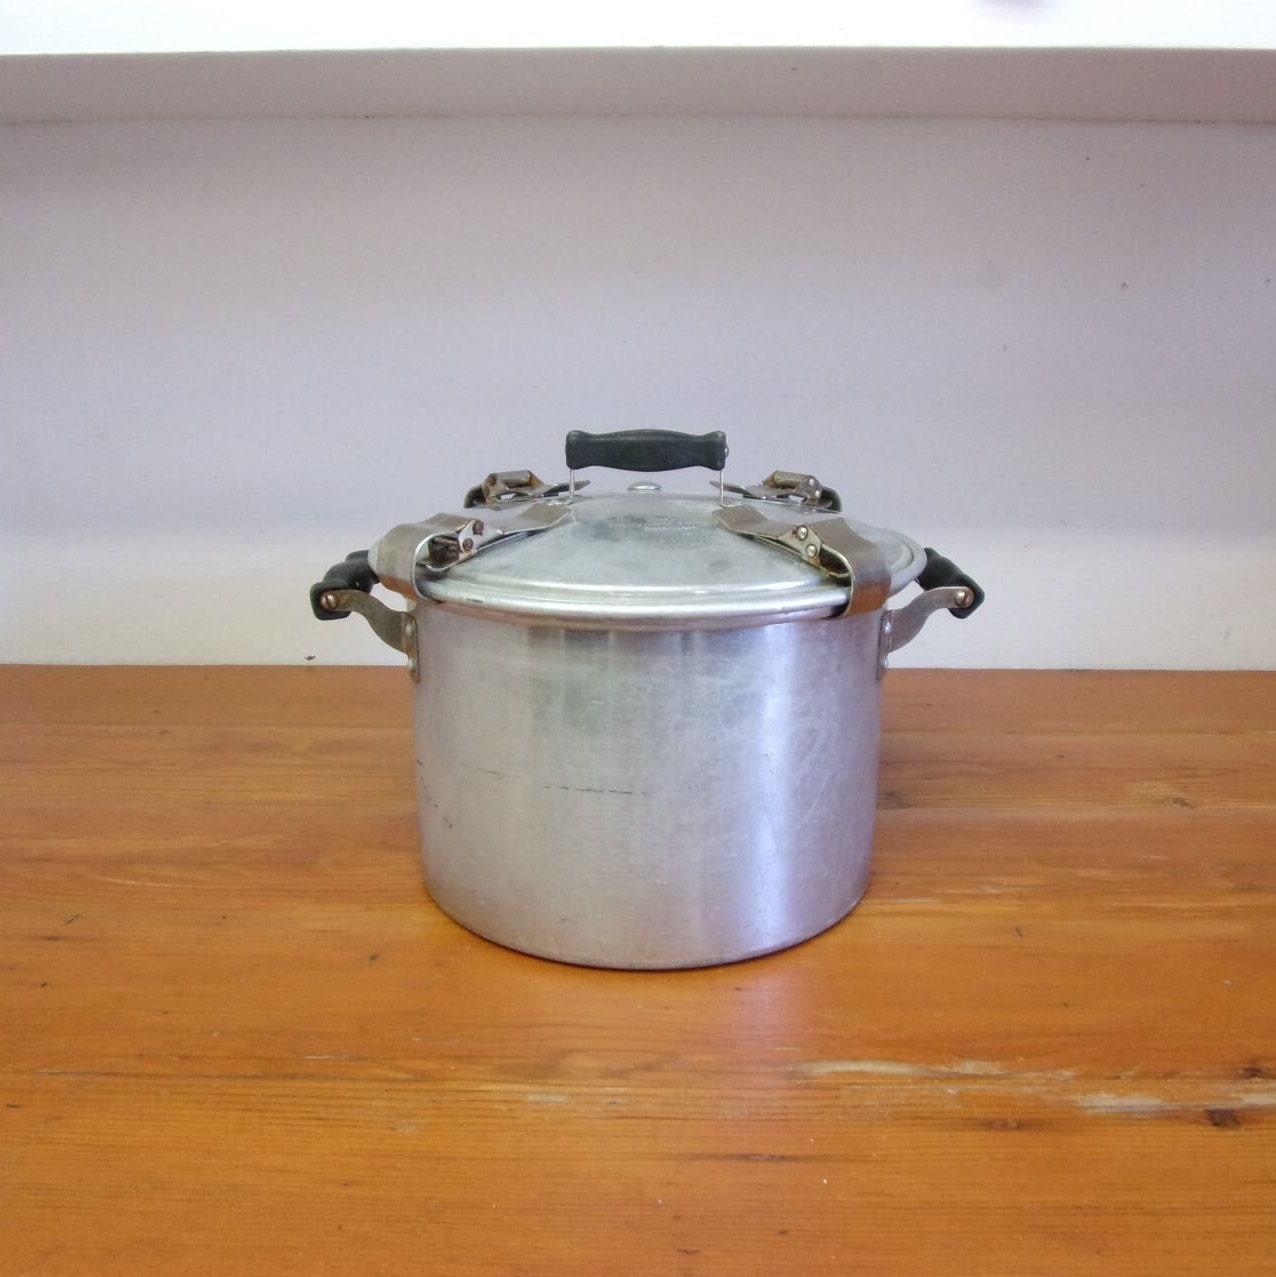 Vintage West Bend 4 Qt Slow Cooker and by ThumbBuddyWithLove